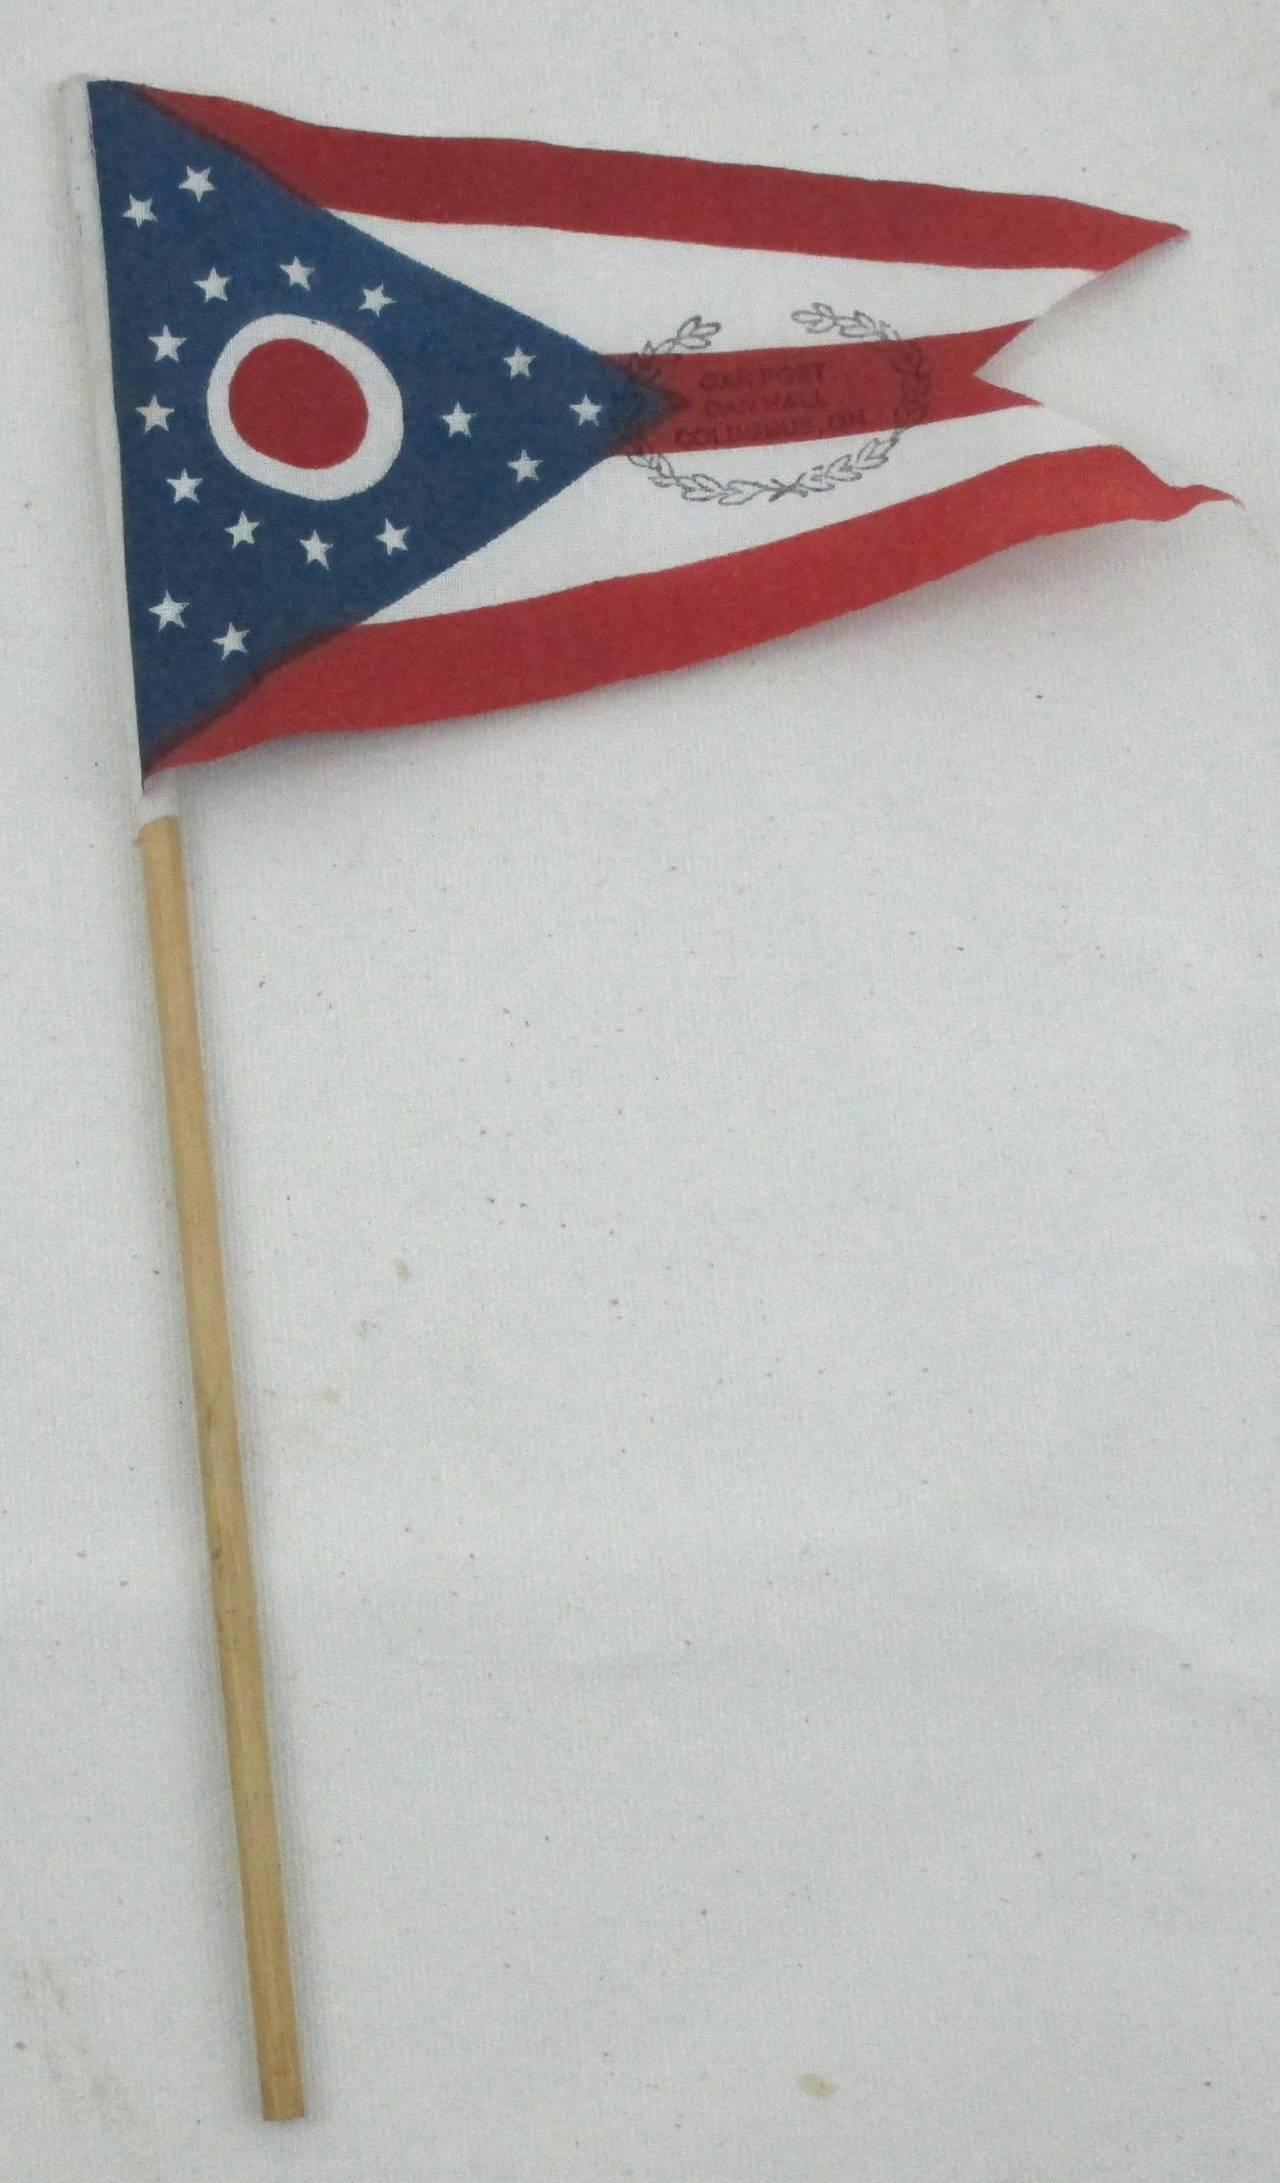 Small Ohio flag flag printed with a wreath motif and 